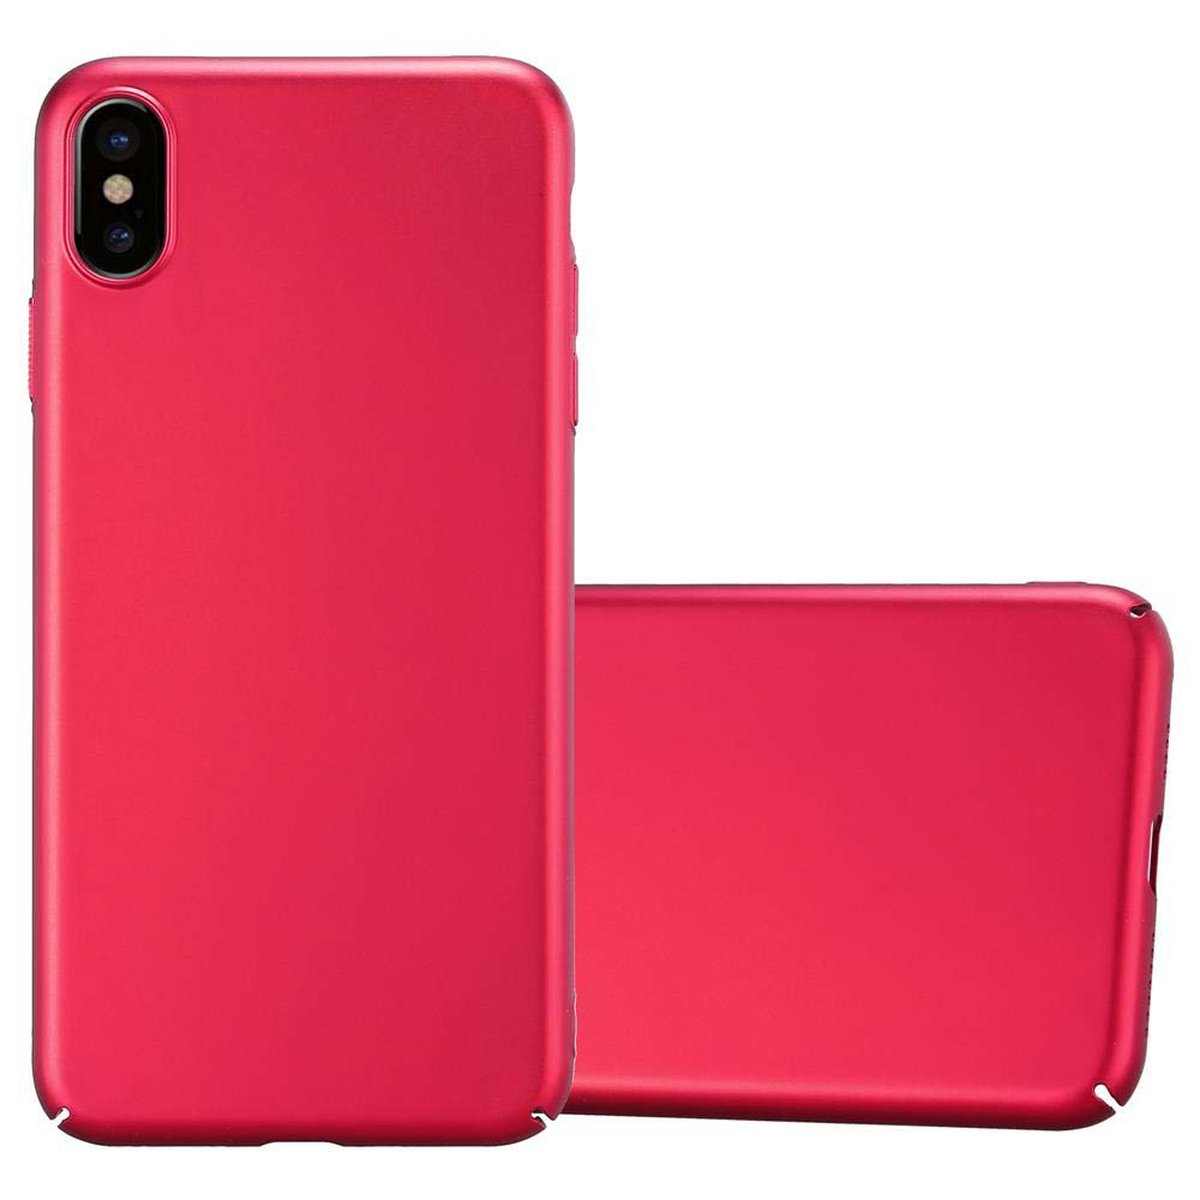 Style, CADORABO METALL iPhone Hülle Metall Backcover, ROT Apple, Hard MAX, im Case Matt XS